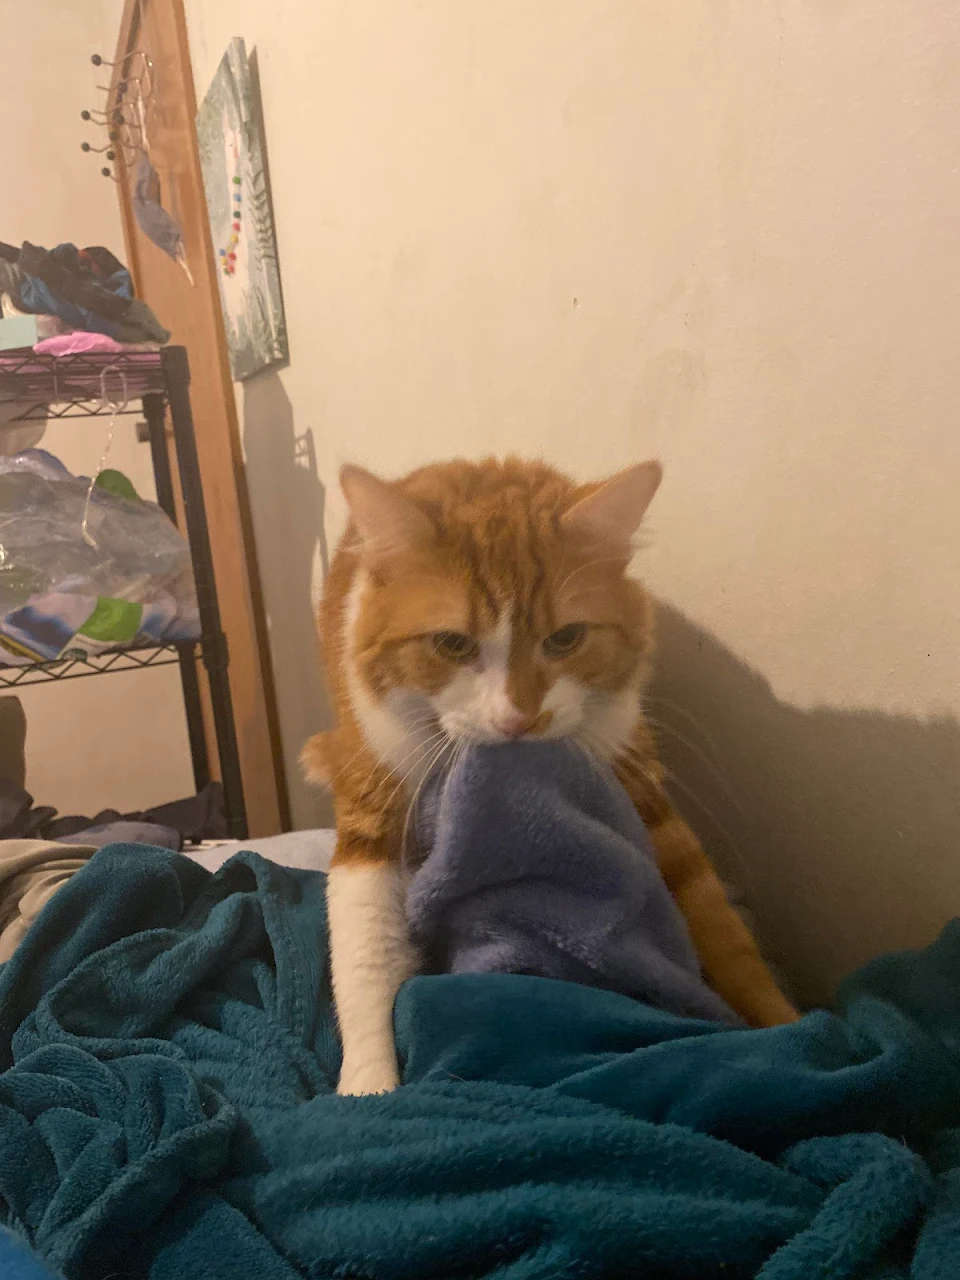 found a photo of my x girlfriends cat being grumpy because I kept touching his favourite blanket